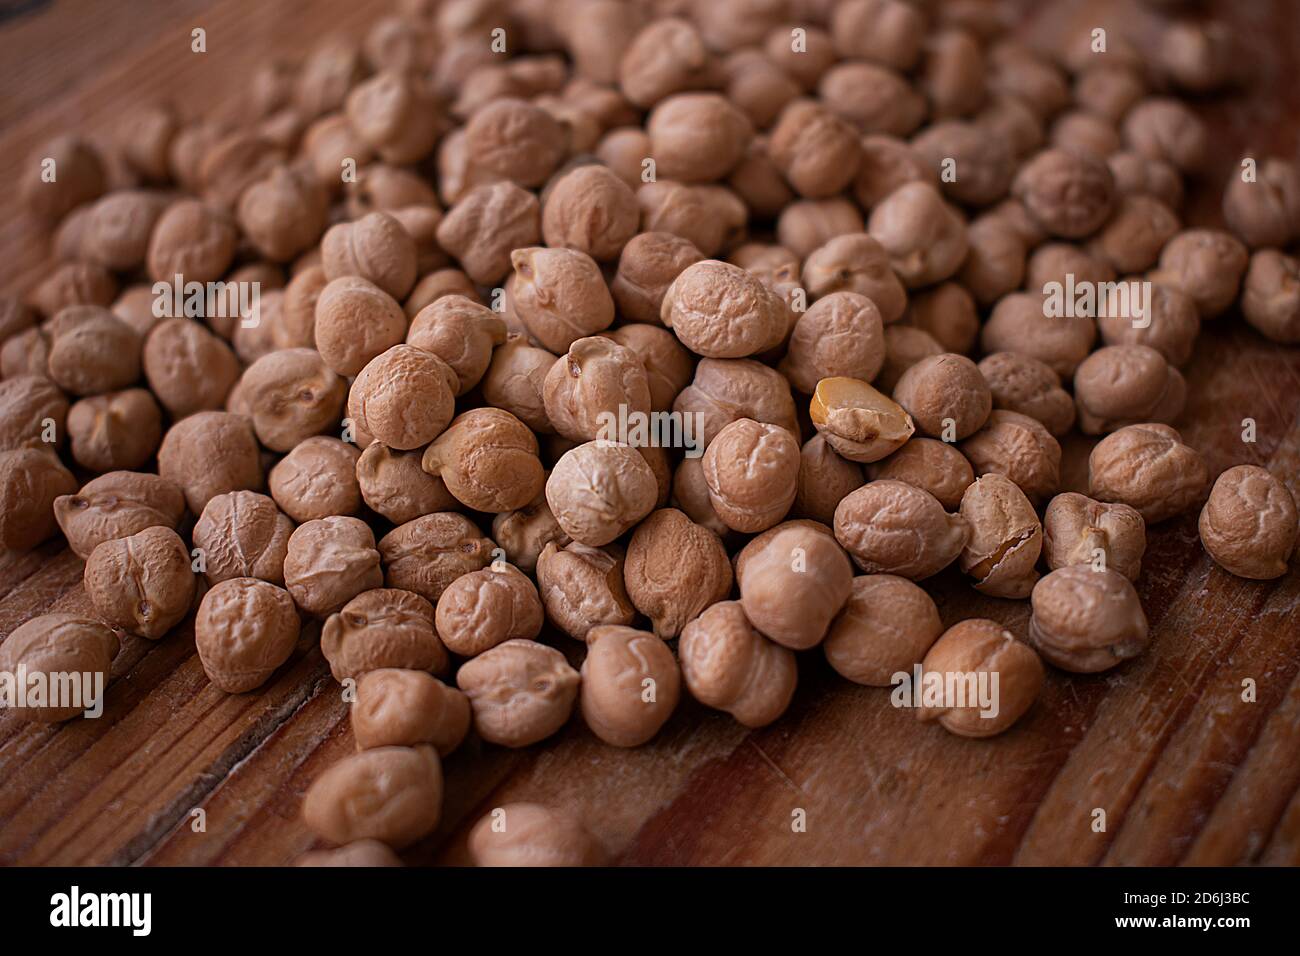 Chickpea grains on wooden background Stock Photo